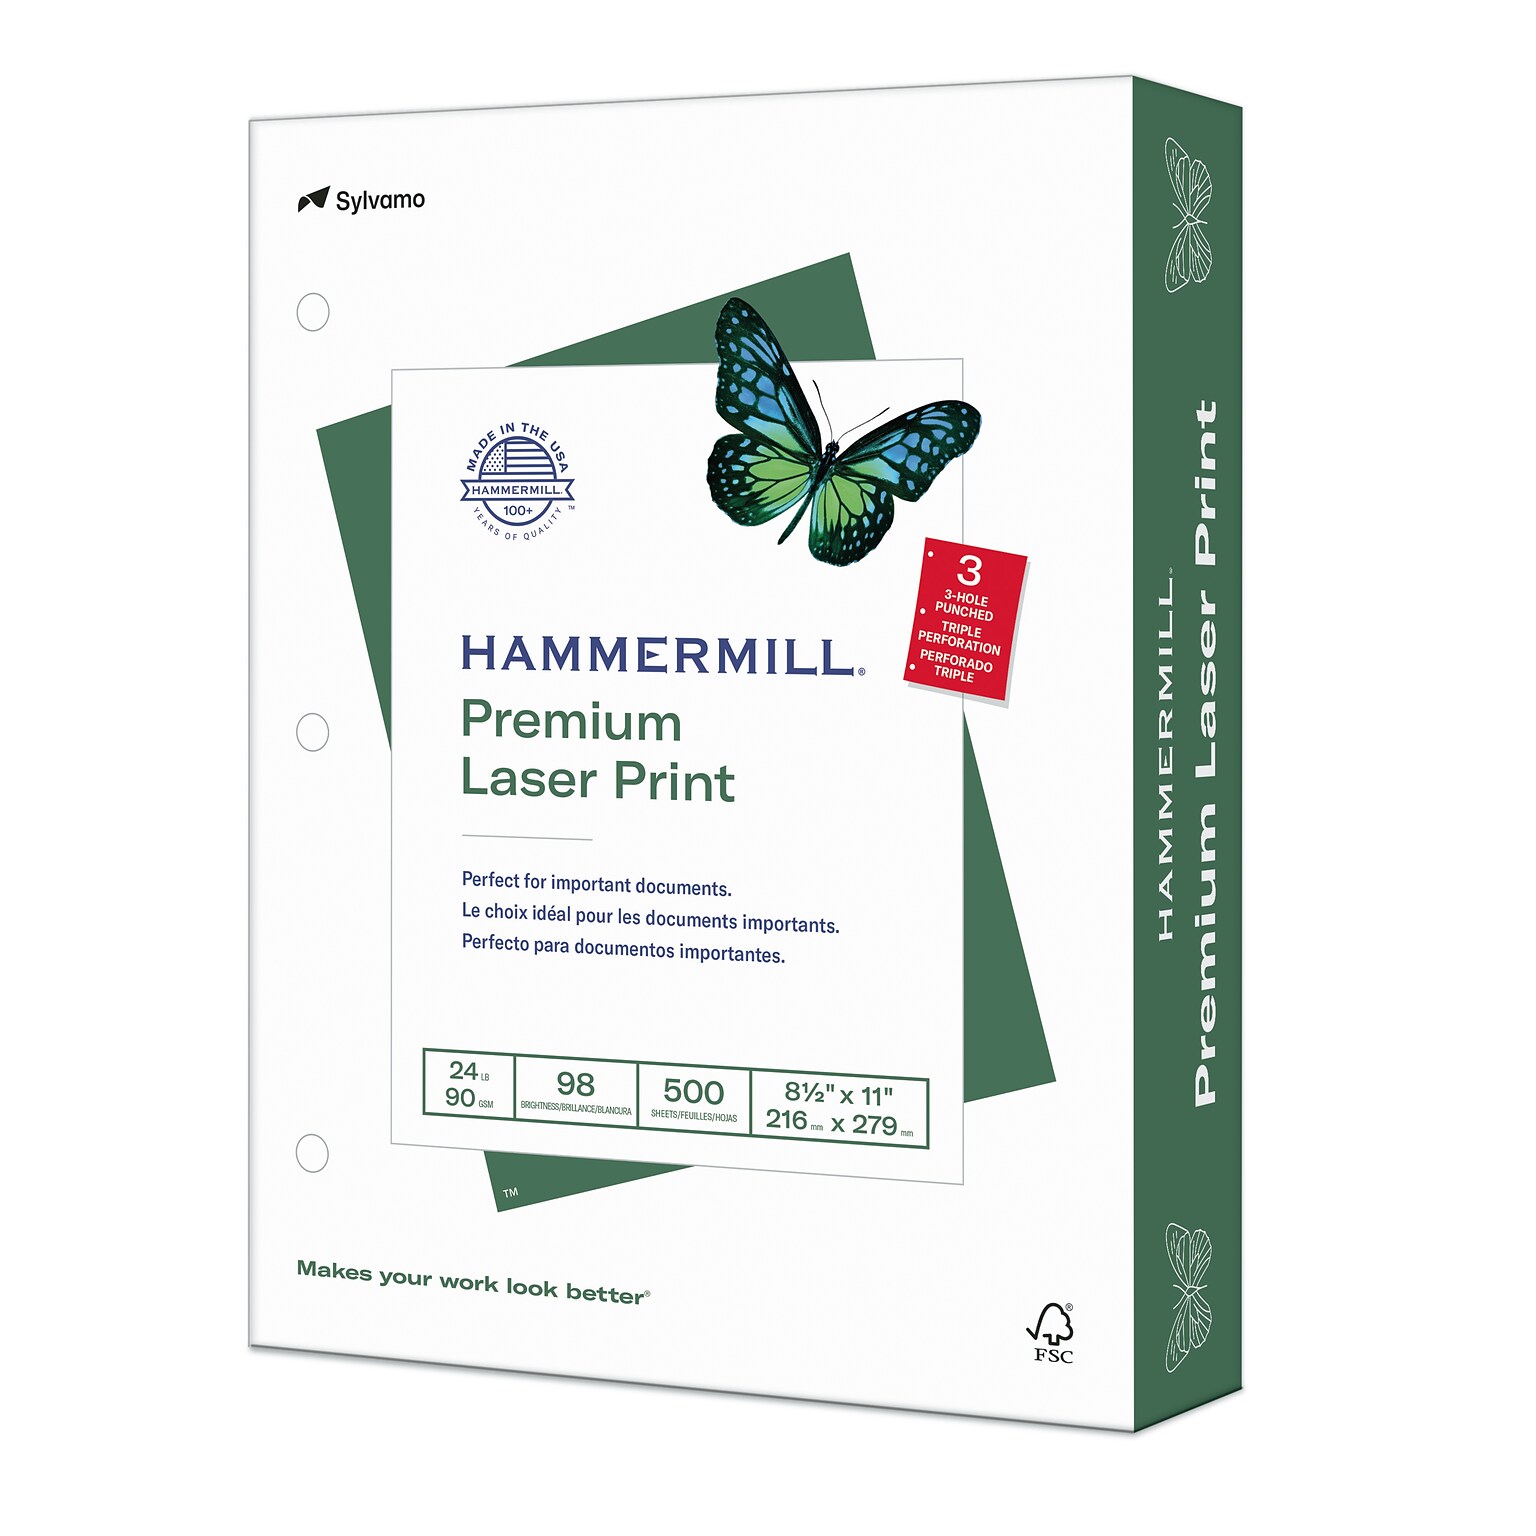 Hammermill Premium Laser Print 8.5 x 11 3-Hole Punched Multipurpose Paper, 24 lbs., 98 Brightness, 500 Sheets/Ream (107681)